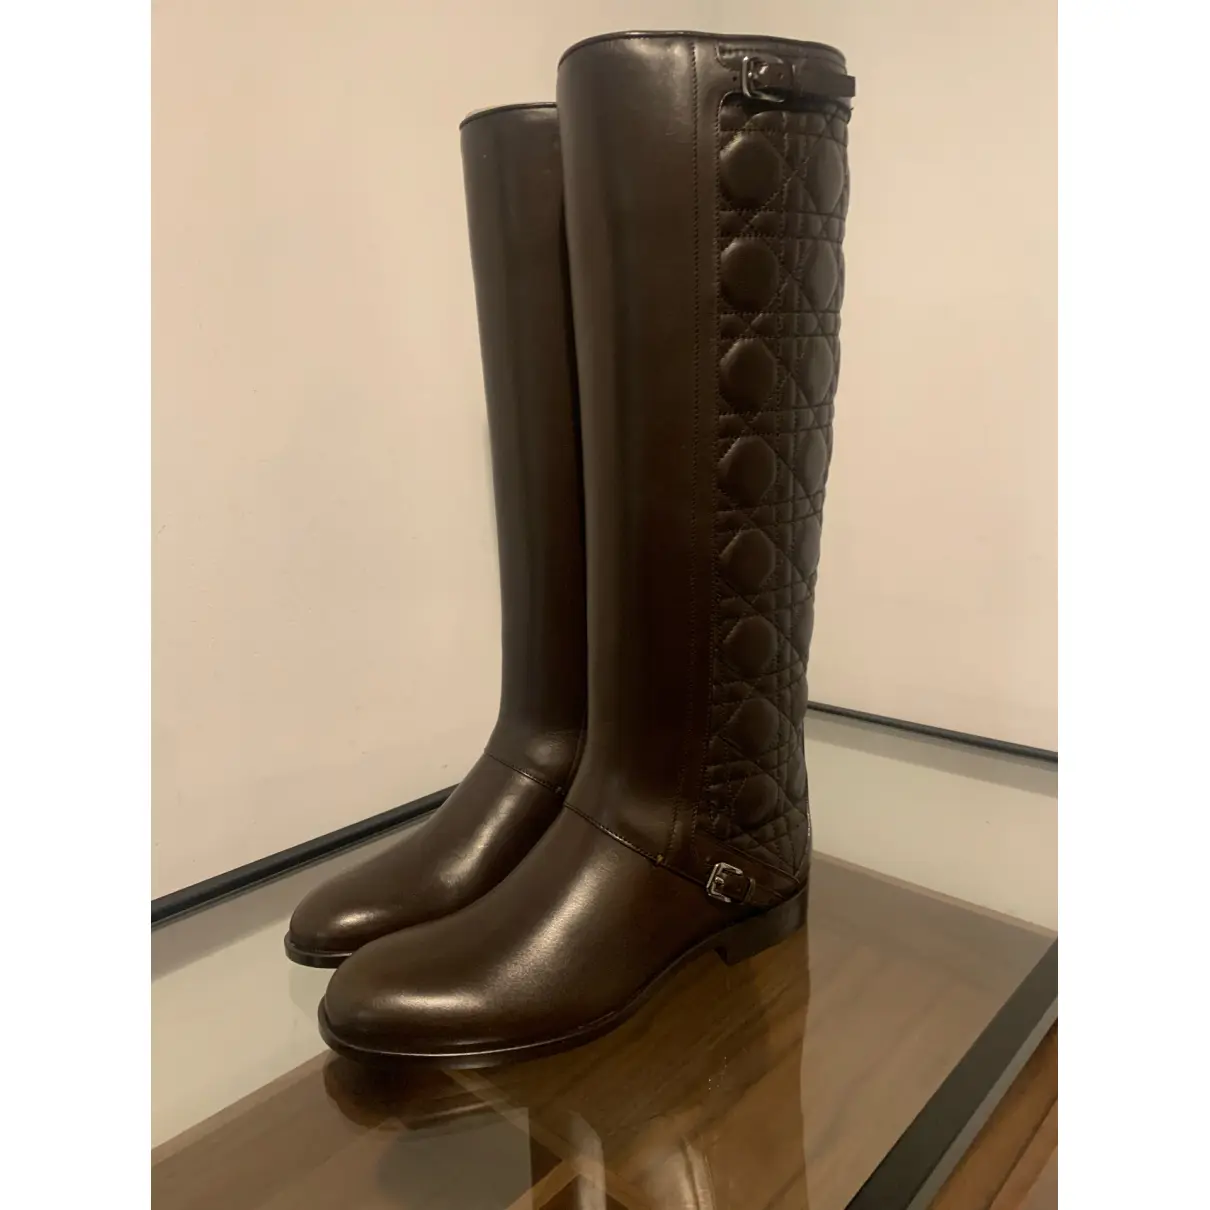 Buy Dior Roadior leather riding boots online